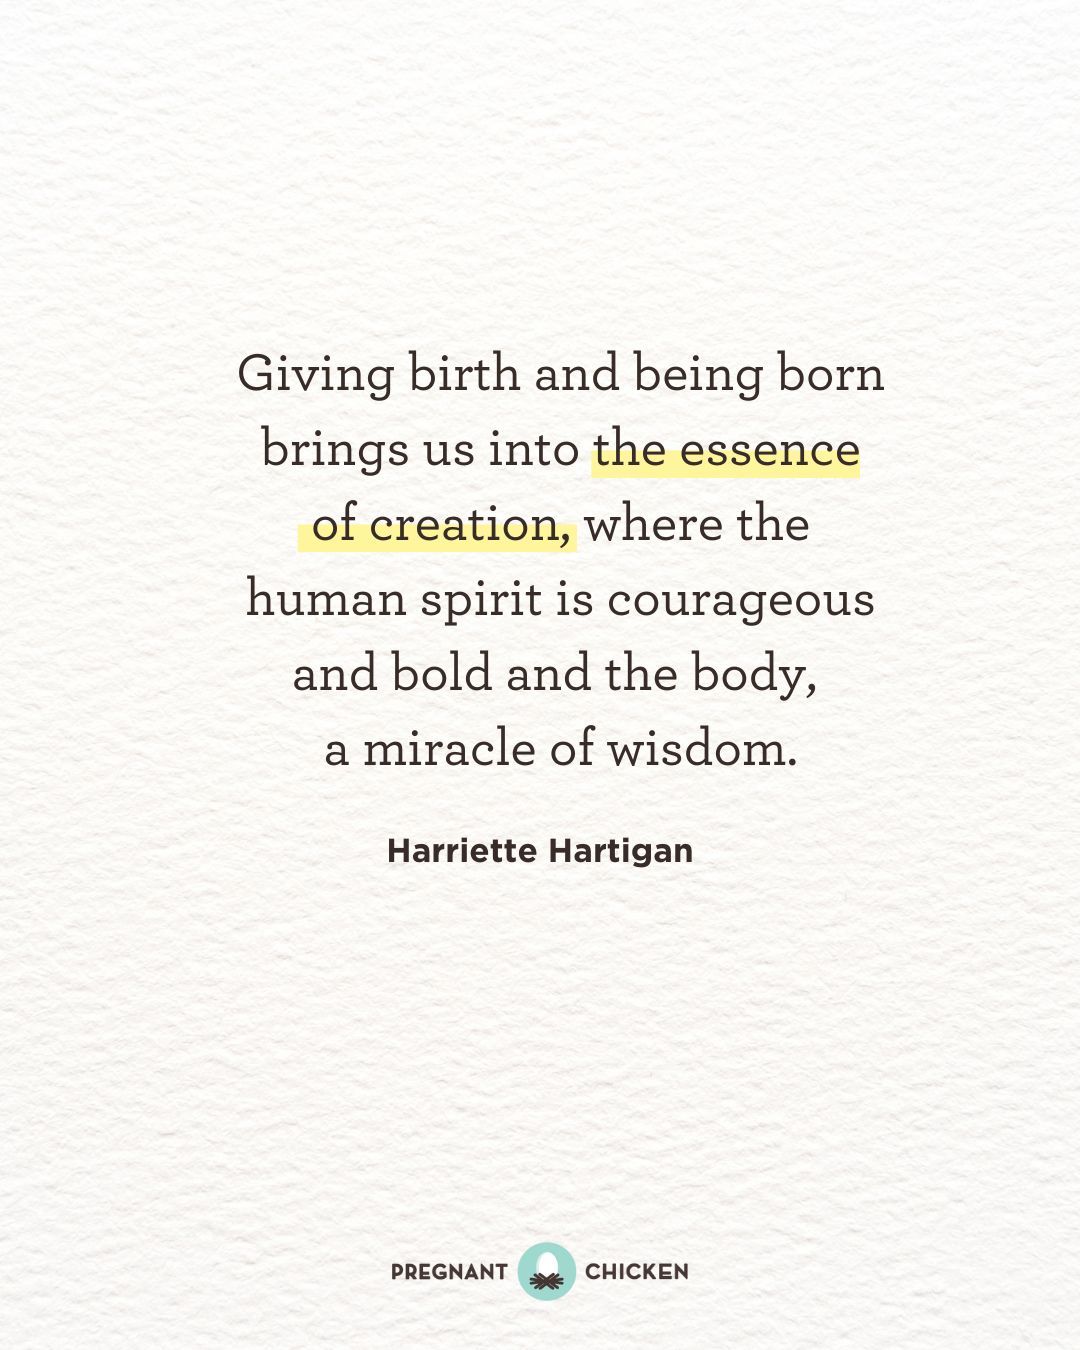 Giving birth and being born brings us into the essence of creation, where the human spirit is courageous and bold and the body,  a miracle of wisdom.